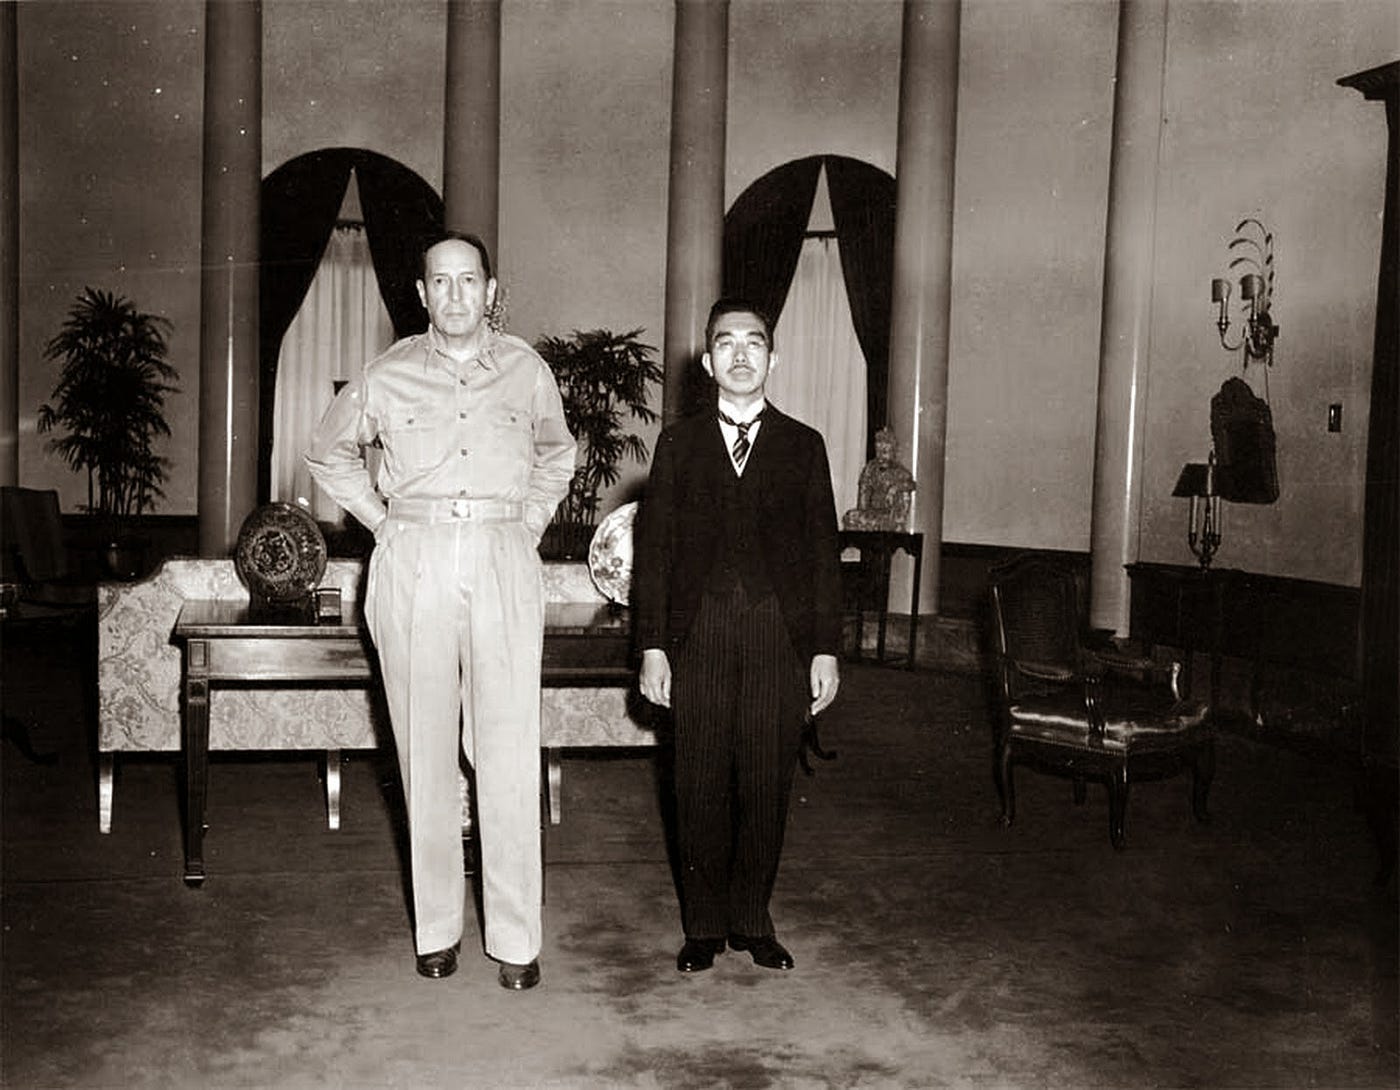 The meaning behind this picture of Emperor Hirohito and General MacArthur |  by Izana tarres | Medium